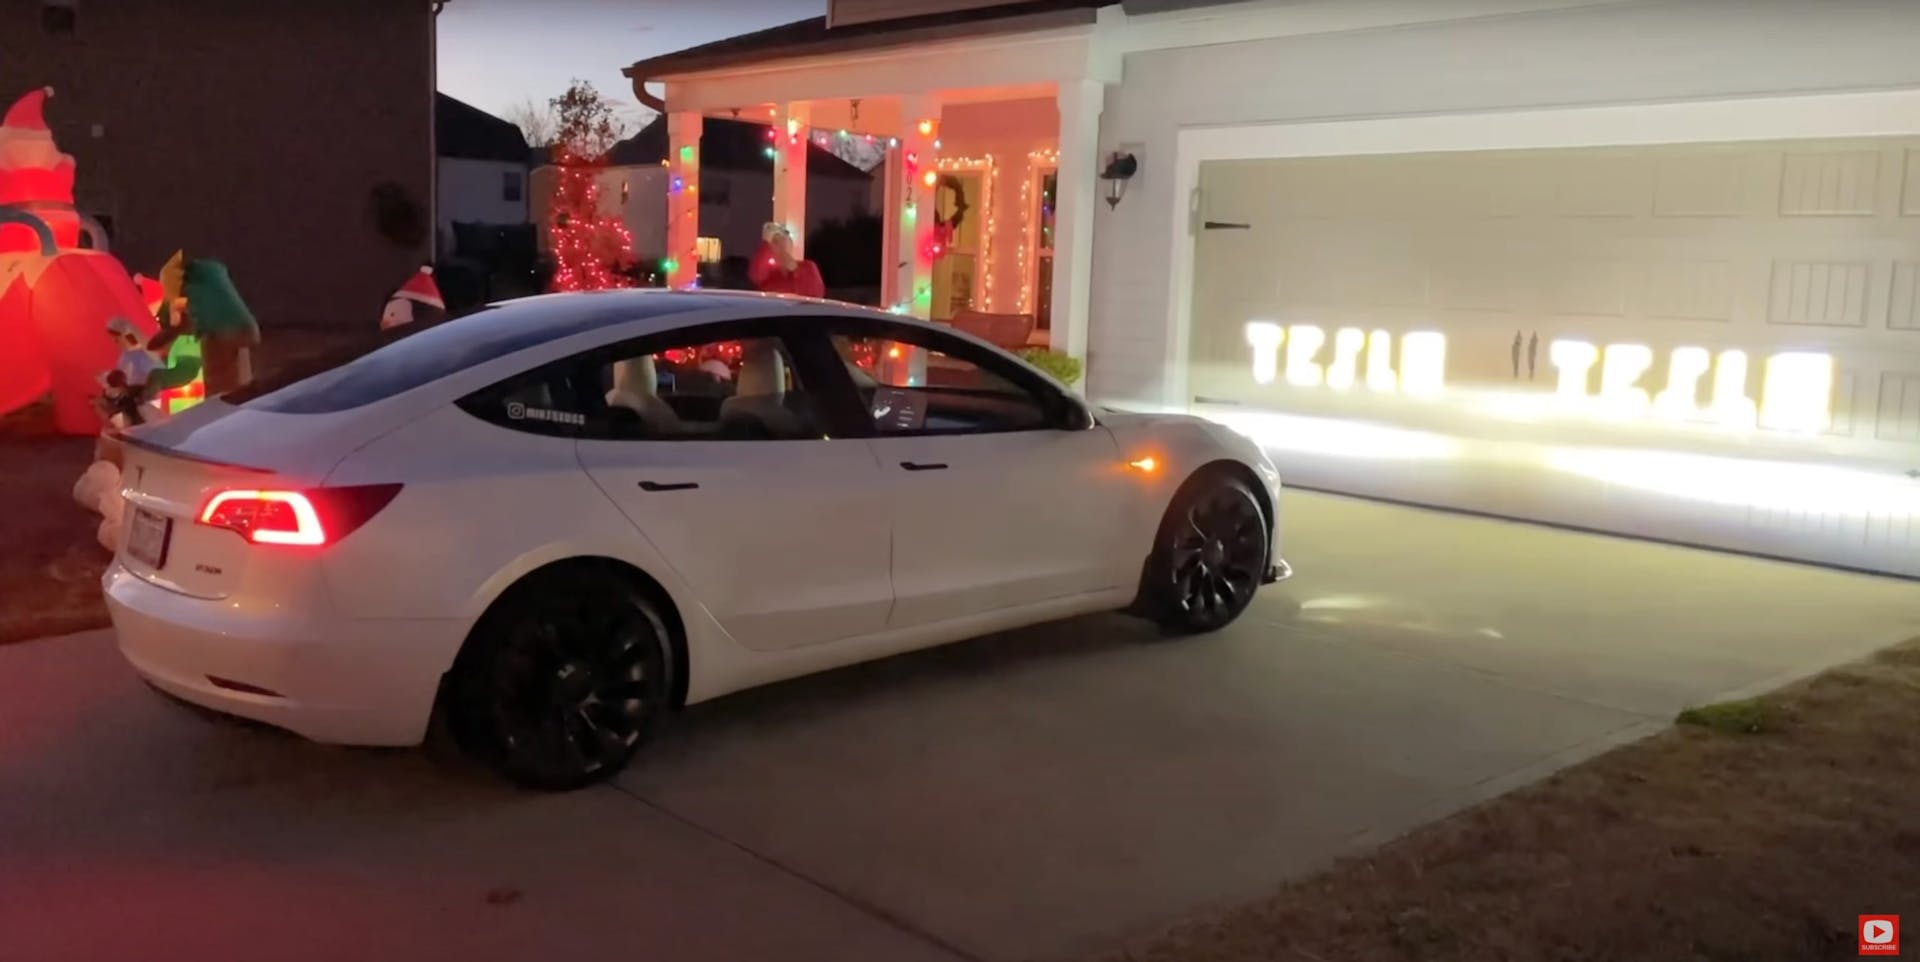 Tesla’s Light Show function supports the matrix headlights on the